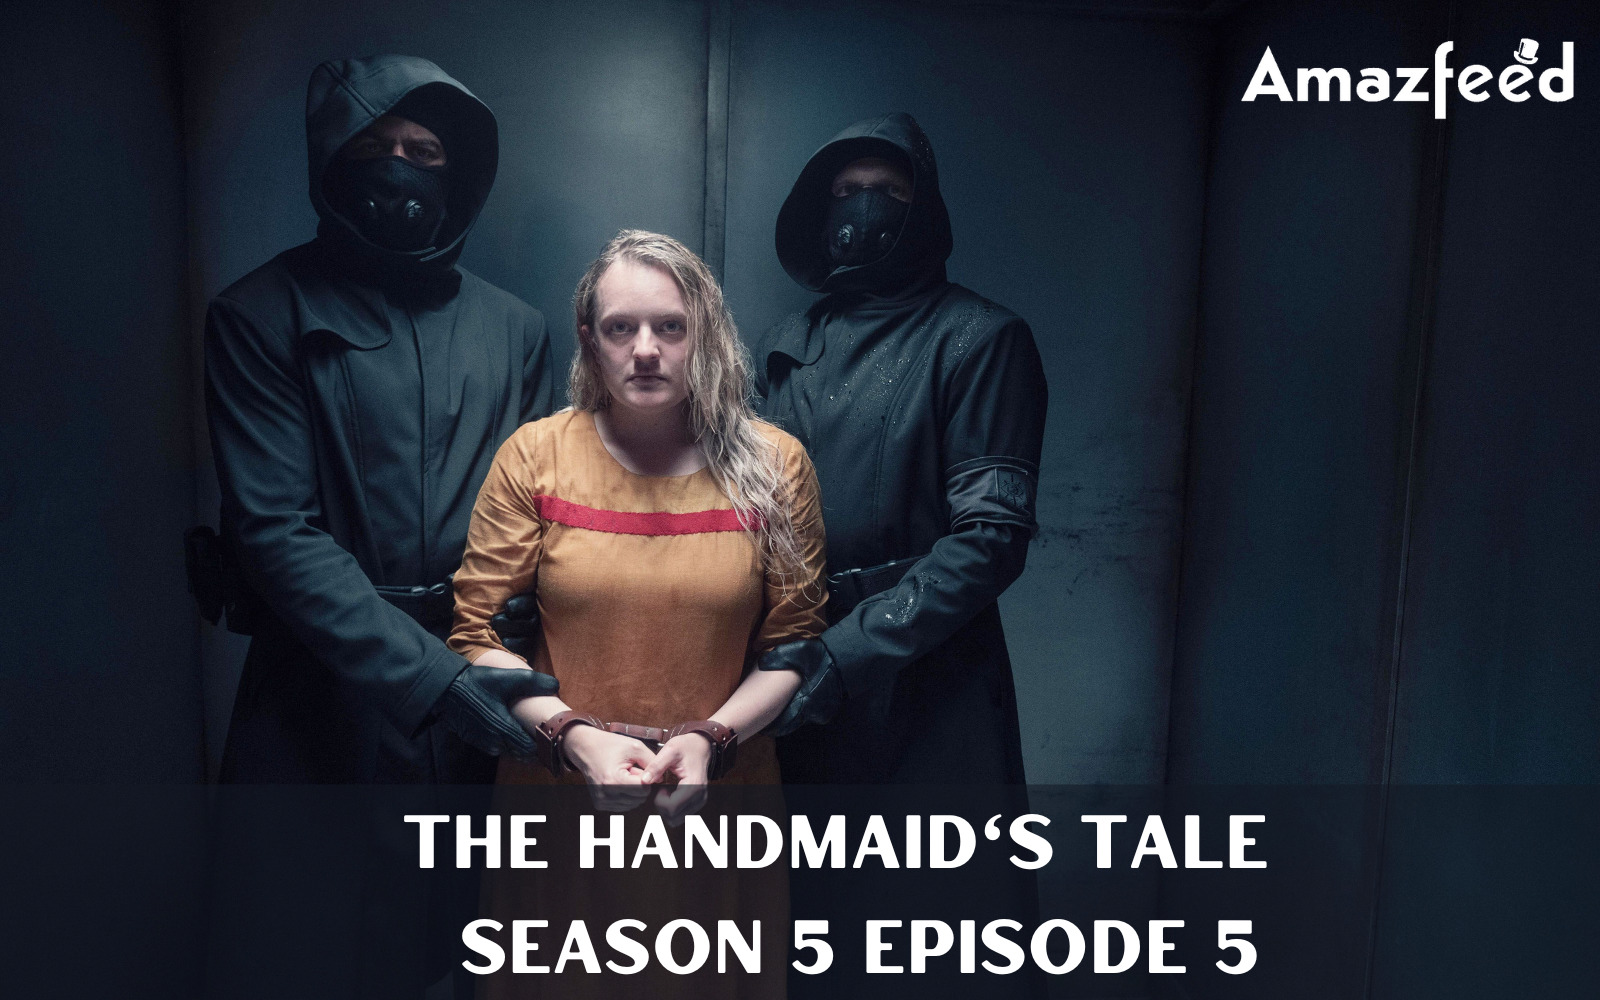 When Is The Handmaid's Tale Season 5 Episode 5 Coming Out (Release Date)